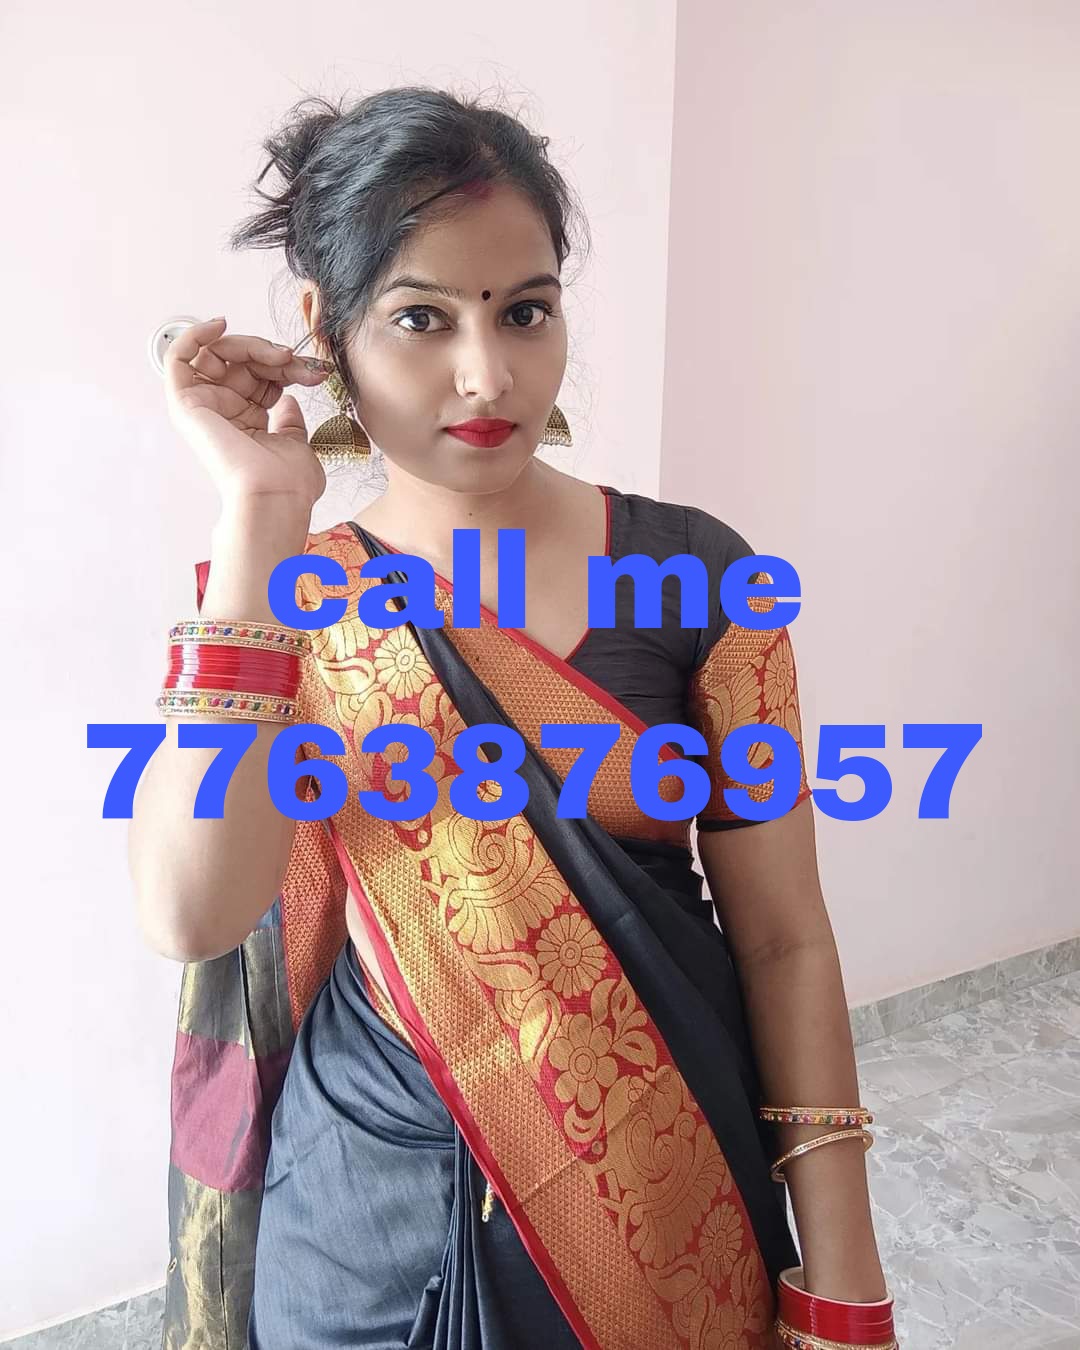 ASANSOL CALL GIRL ONLY CASH PAYMENT SERVICE AVAILABLE 